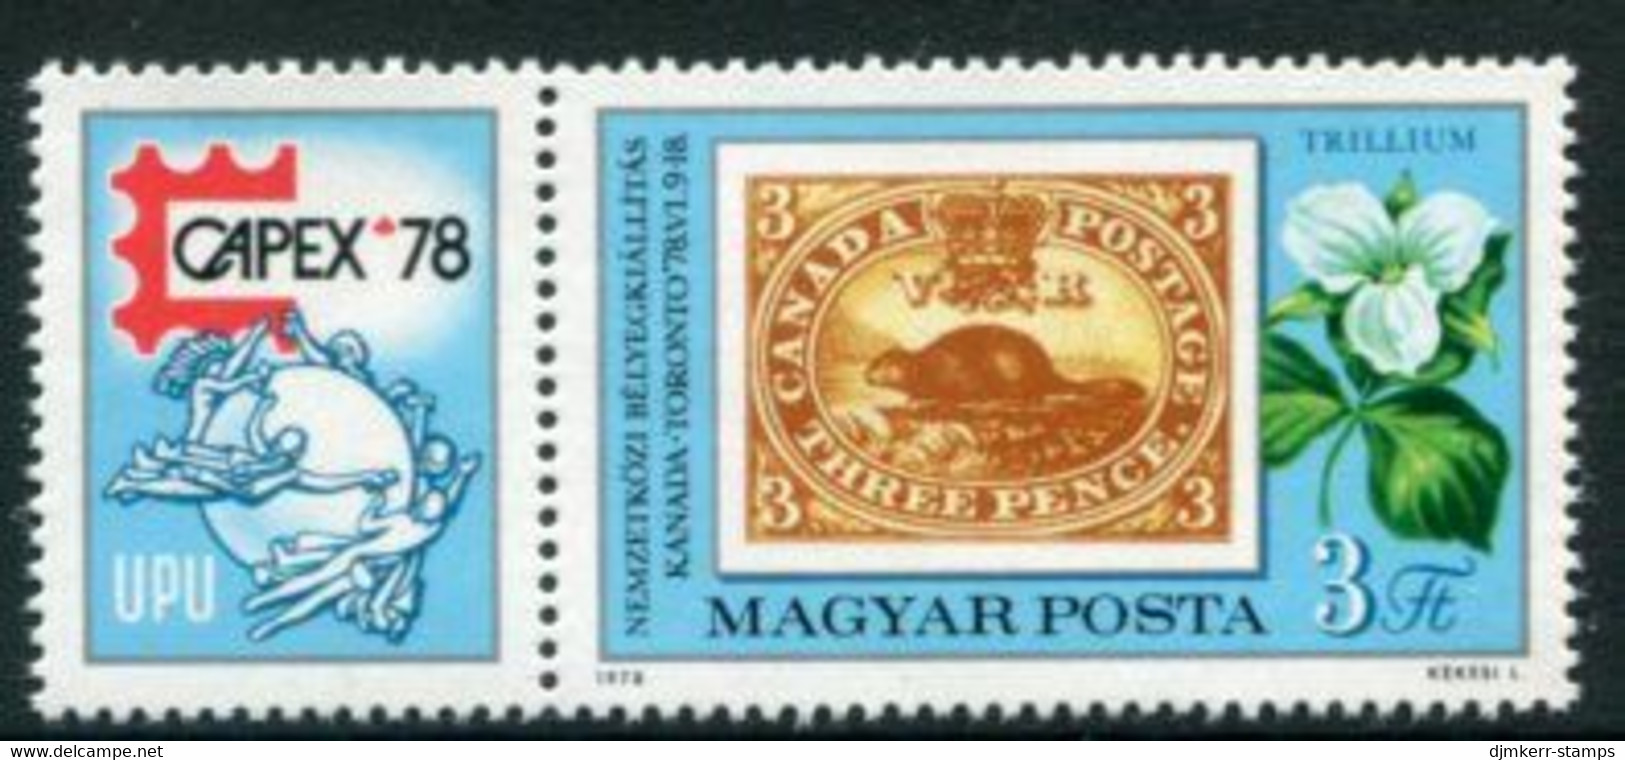 HUNGARY 1978 CAPEX Stamp Exhibition  MNH /**  Michel 3293 - Neufs